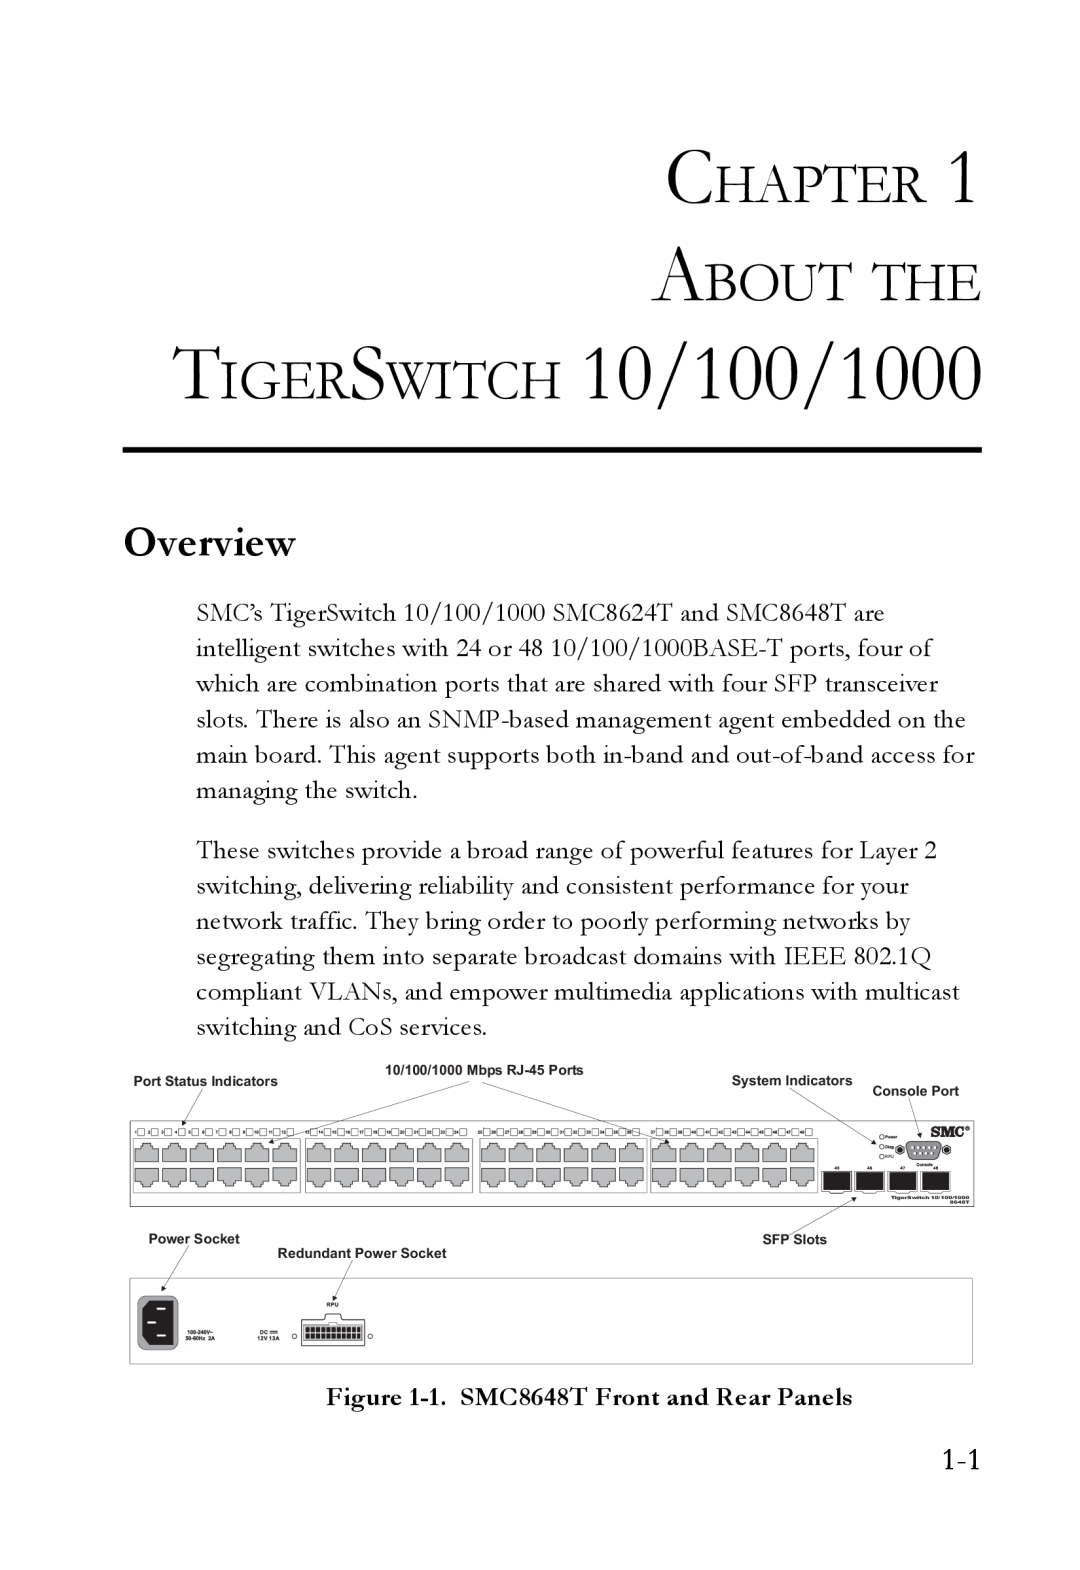 SMC Networks SMC8624T manual Chapter About The, Overview, TIGERSWITCH 10/100/1000, 1. SMC8648T Front and Rear Panels 